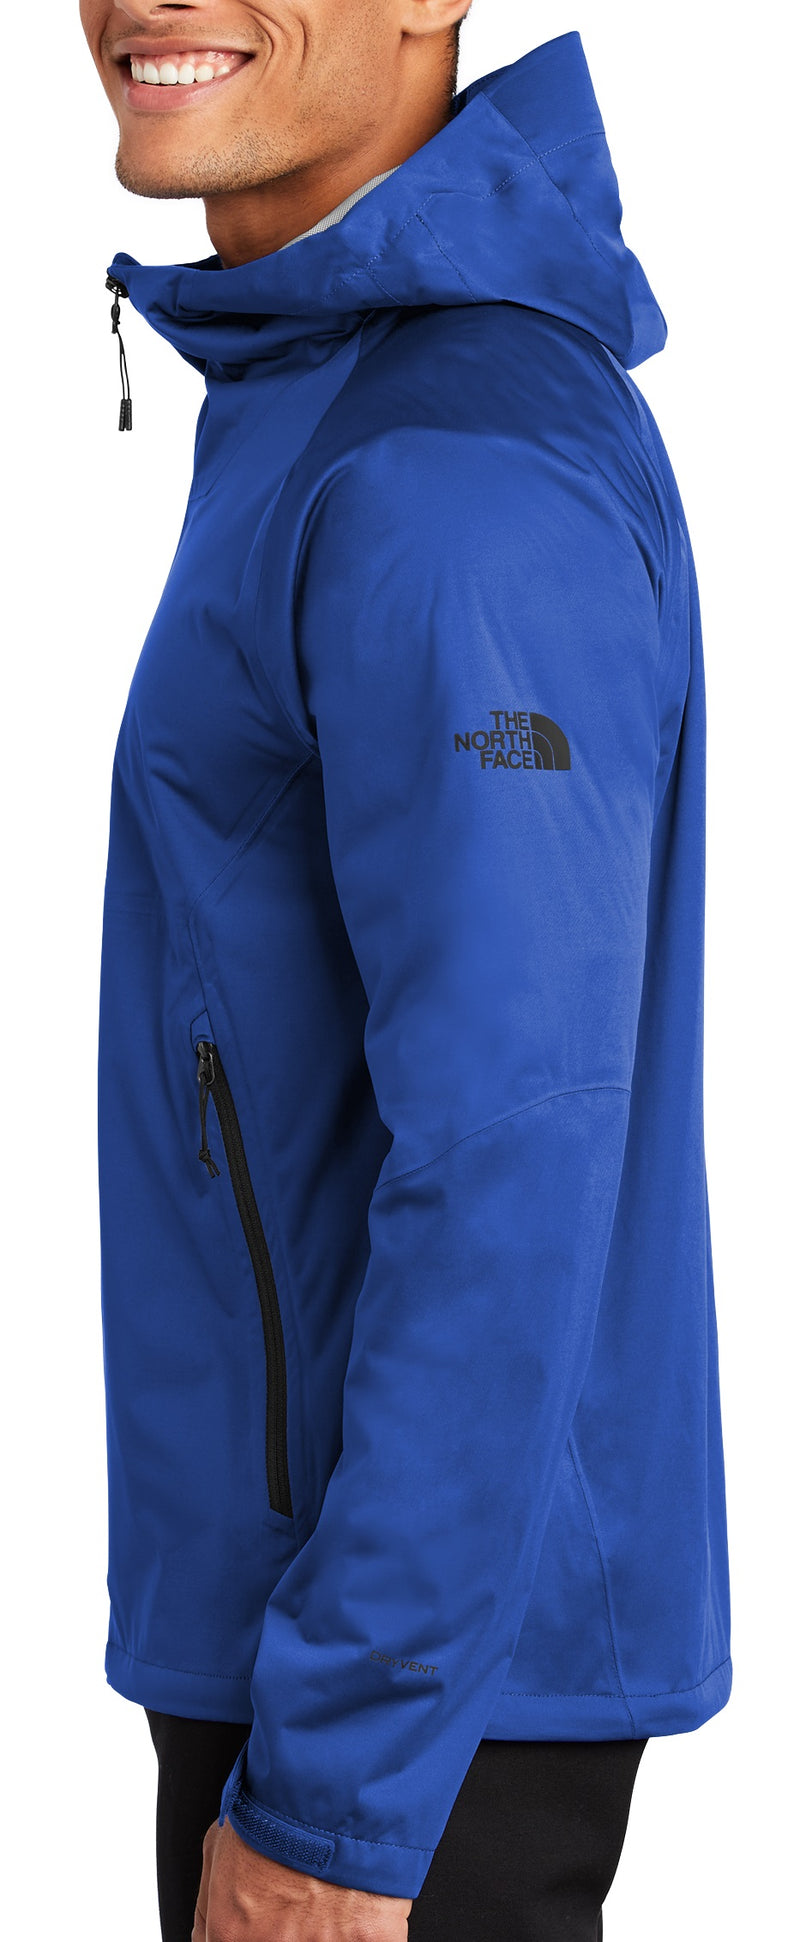 The North Face NF0A3LH4 DryVent Rain Jacket - TNF Black - M